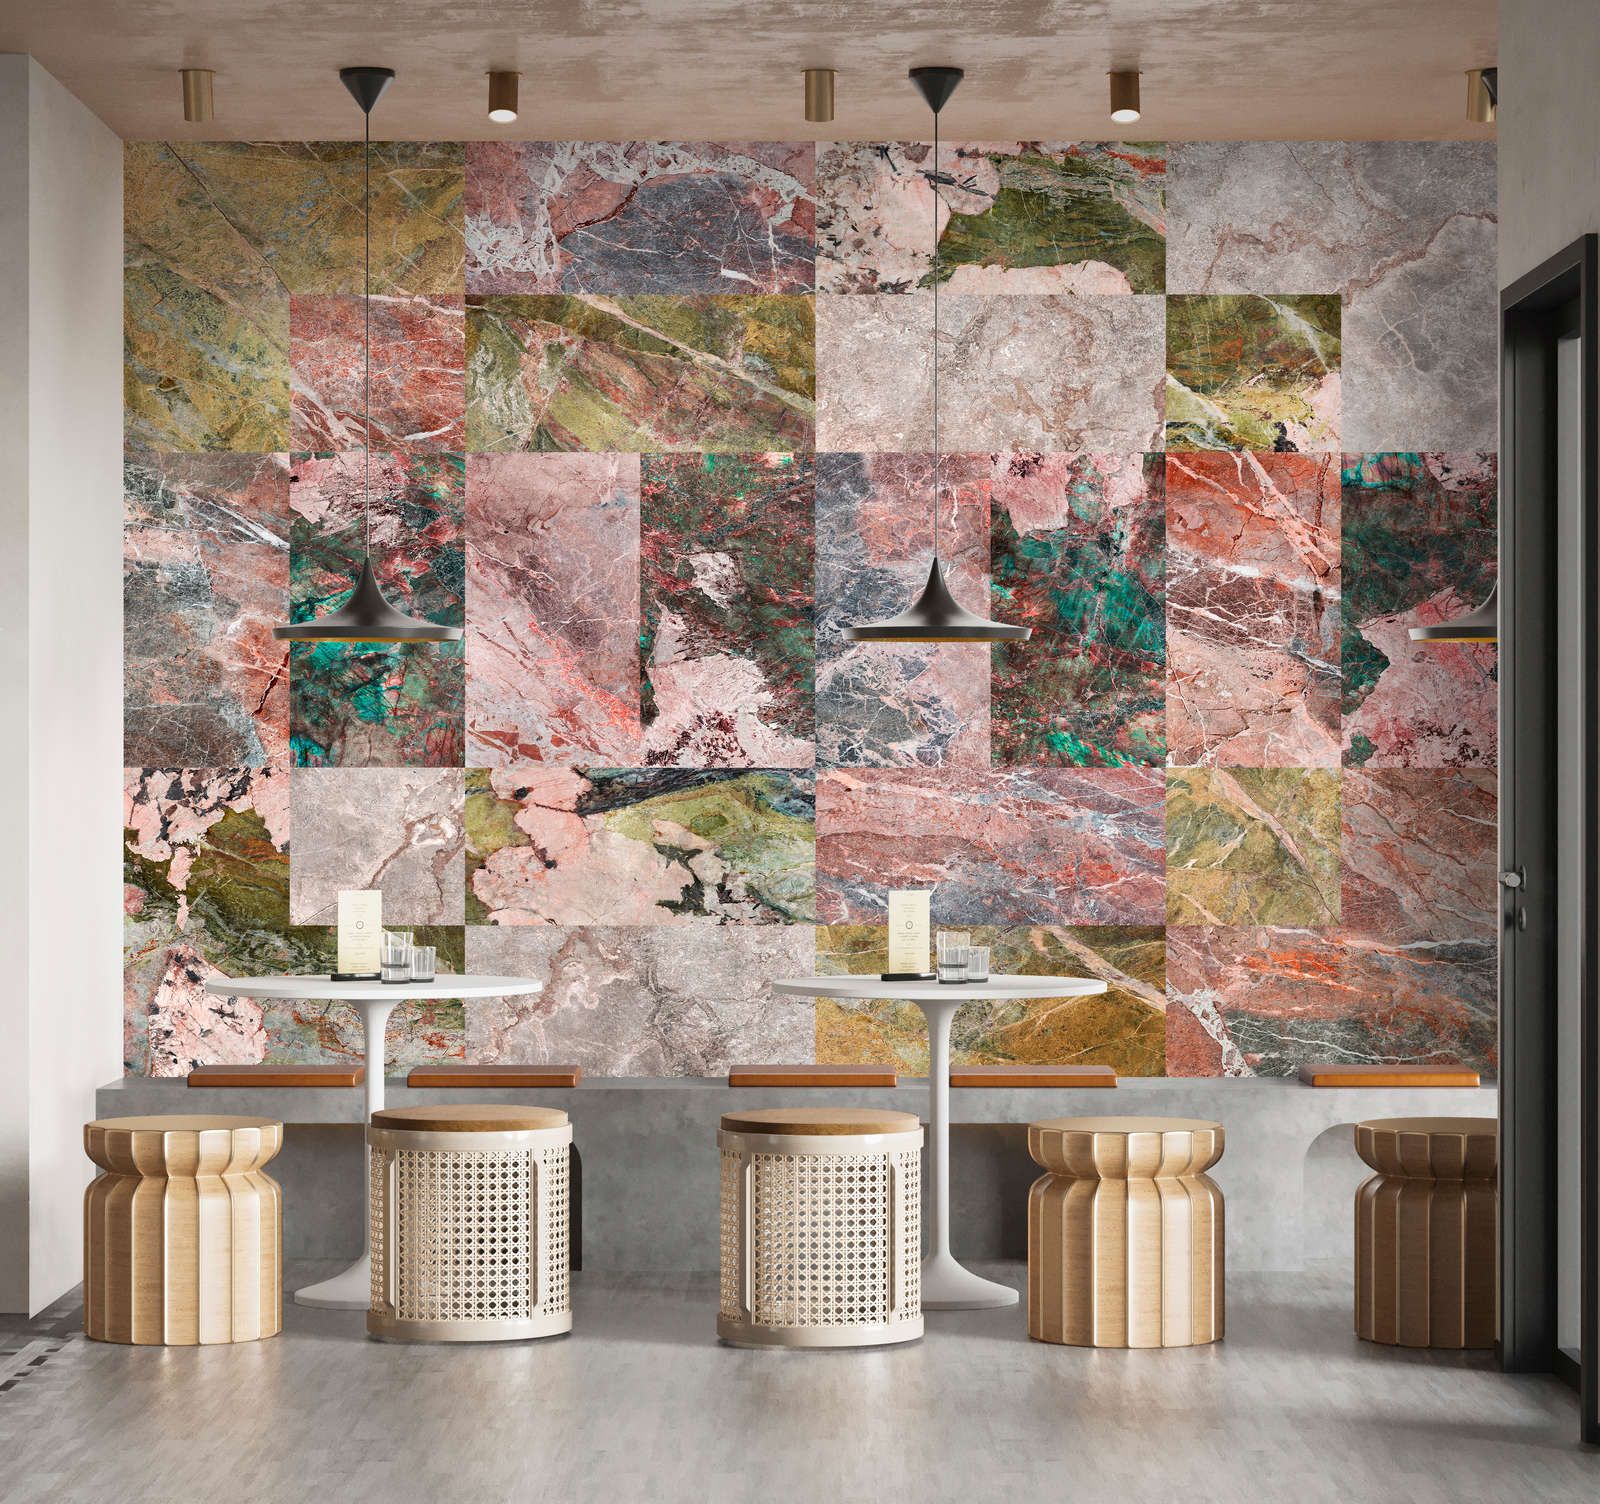             Photo wallpaper »mixed marble« - Marble patchwork design - Colourful | Smooth, slightly shiny premium non-woven fabric
        